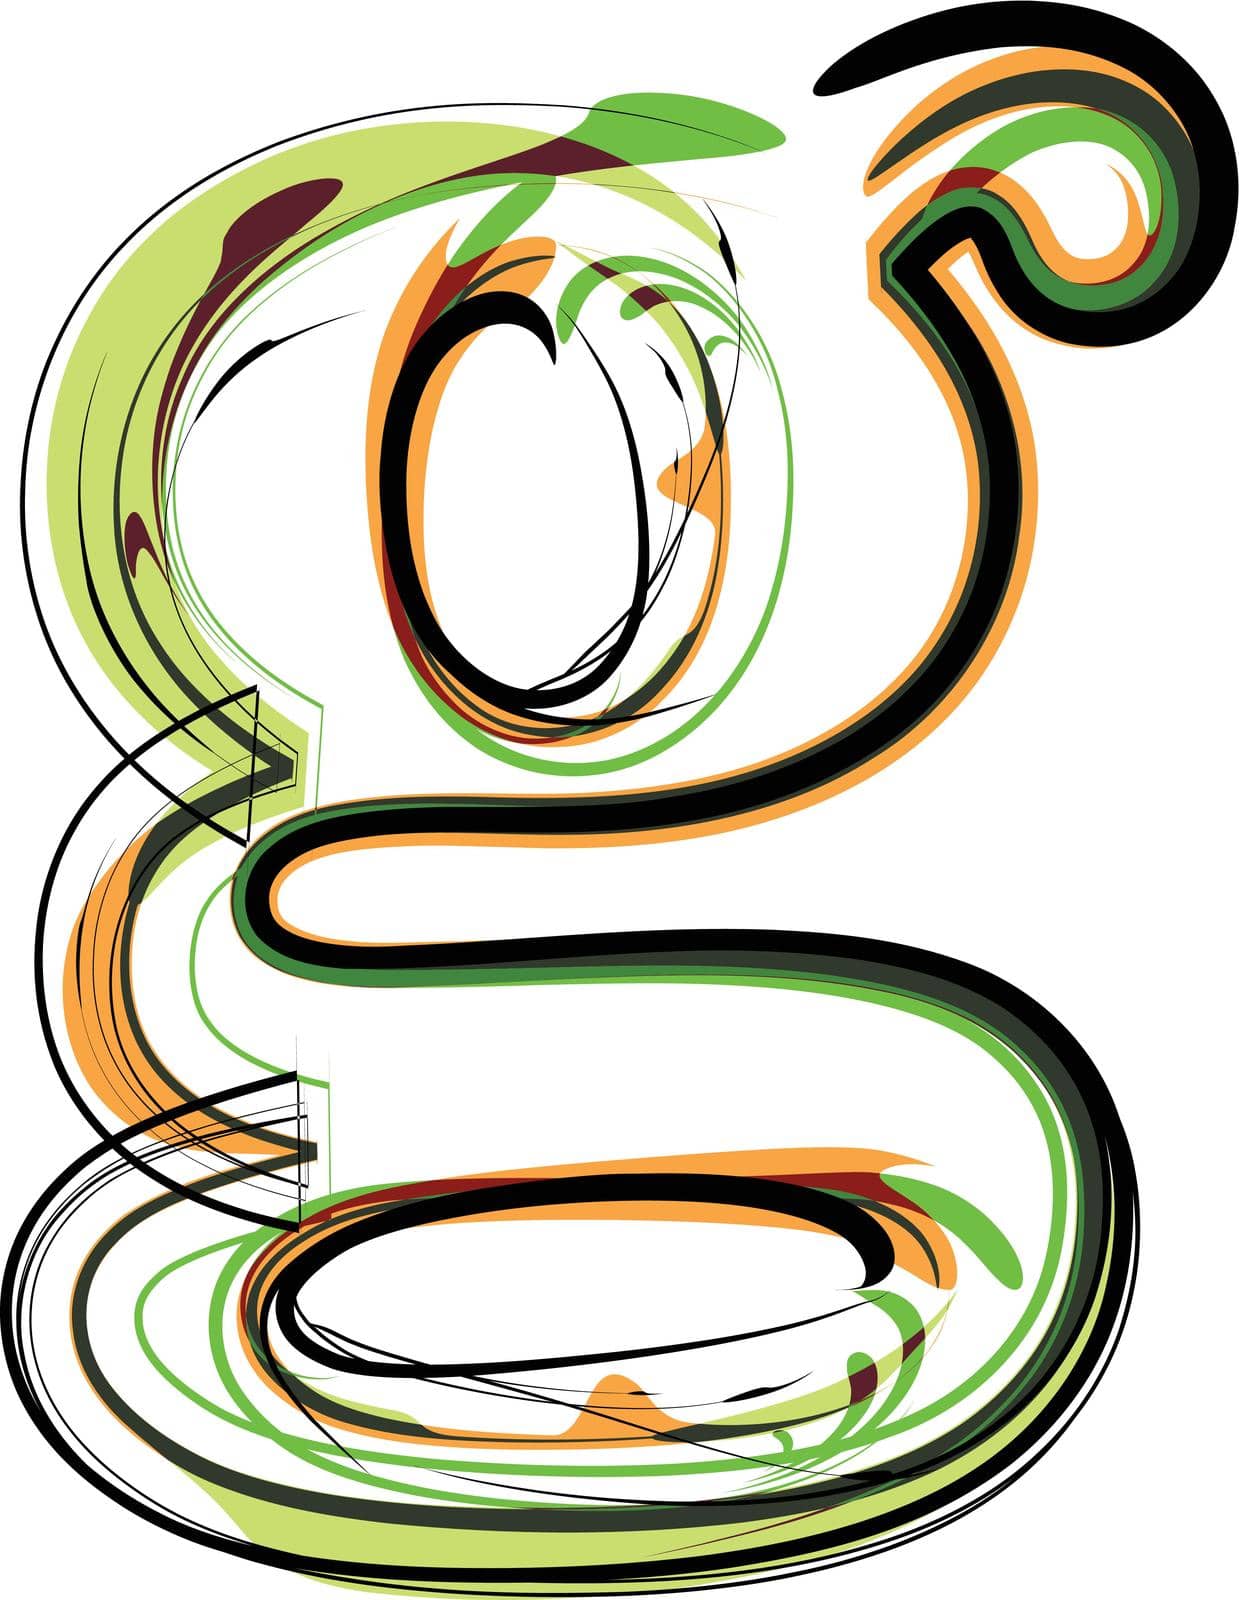 Organic type letter g by aroas